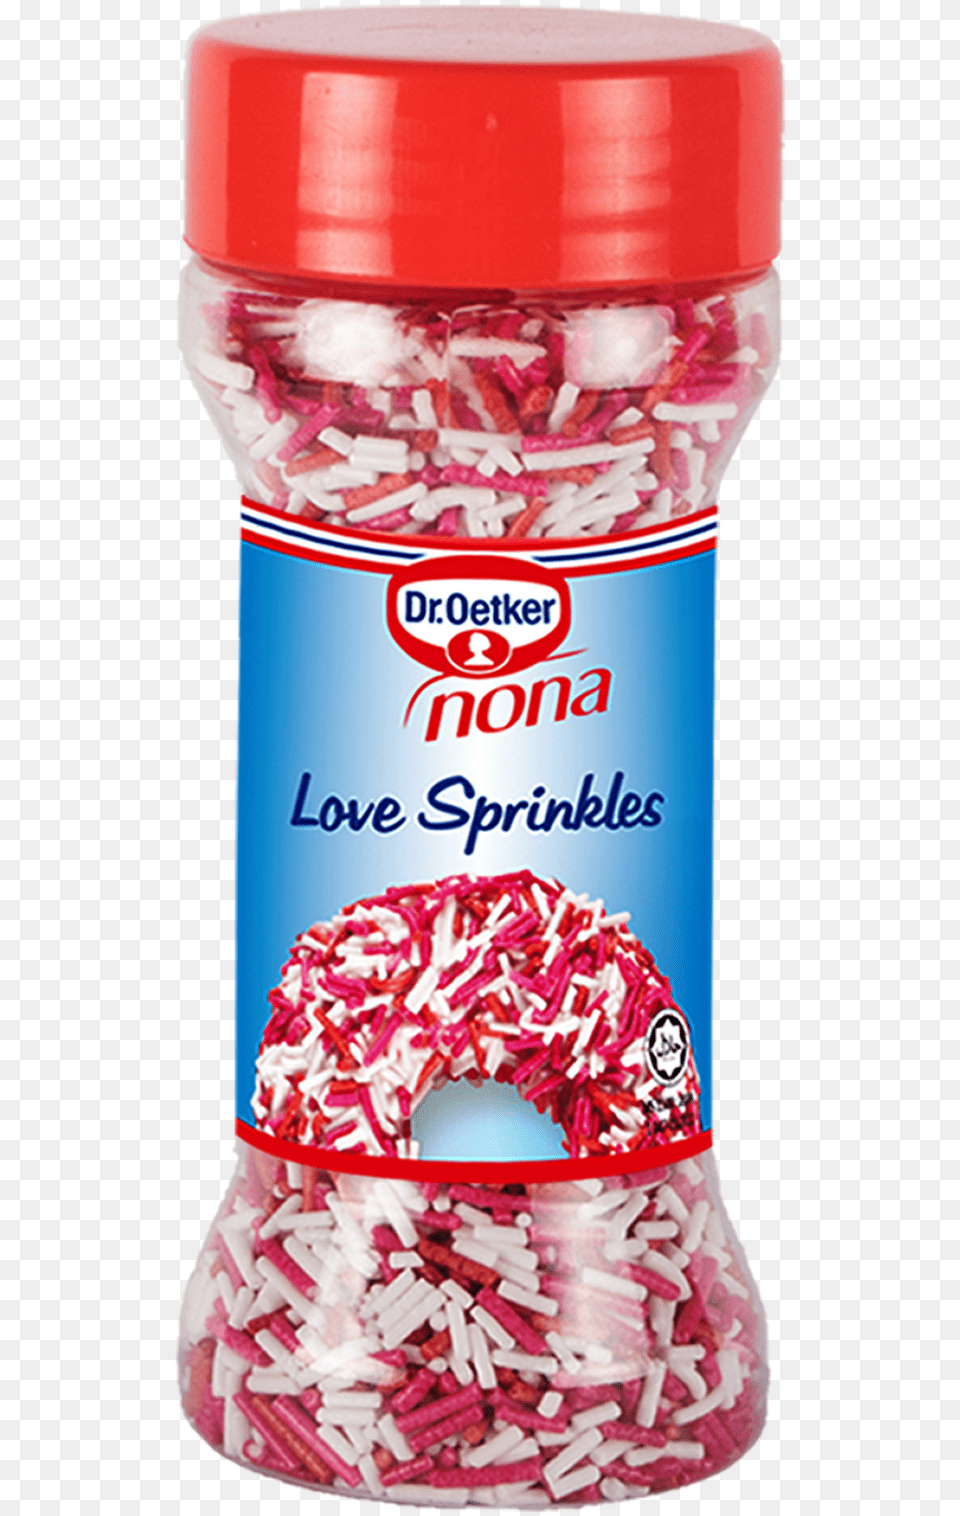 Rice Cake, Sprinkles, Food, Sweets, Can Png